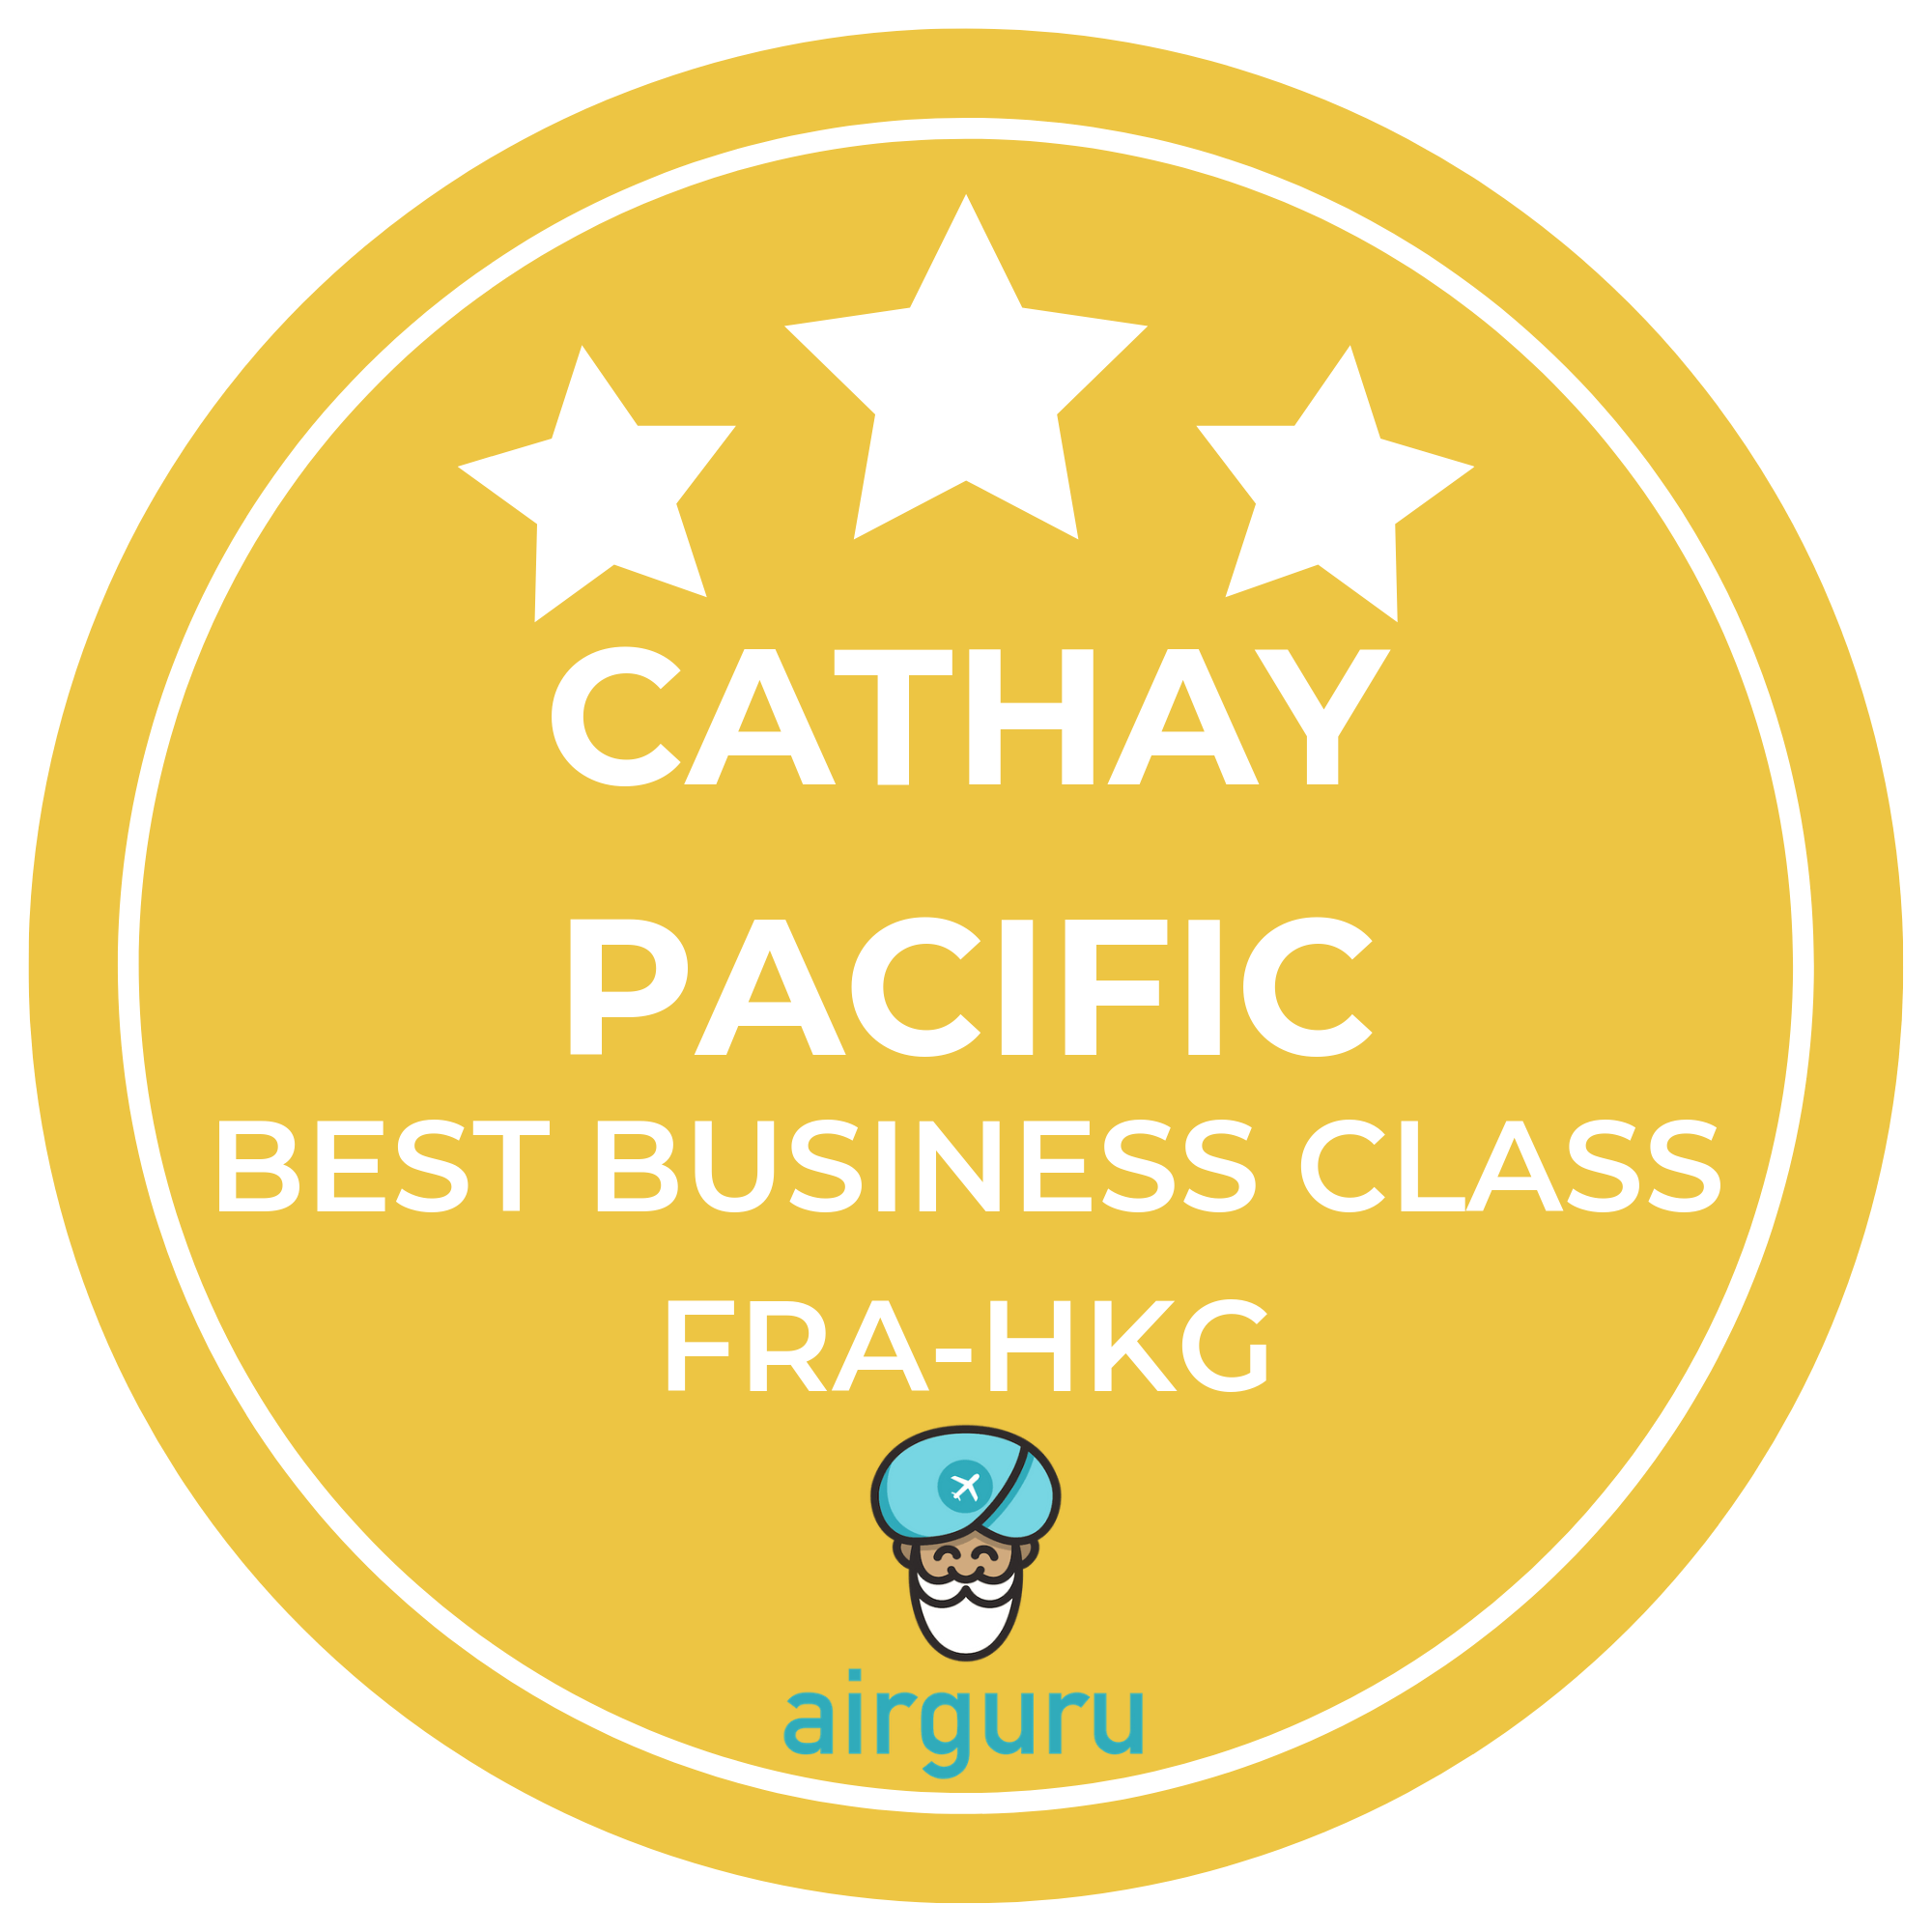 Cathay Pacific Best Business Class FRA-HKG